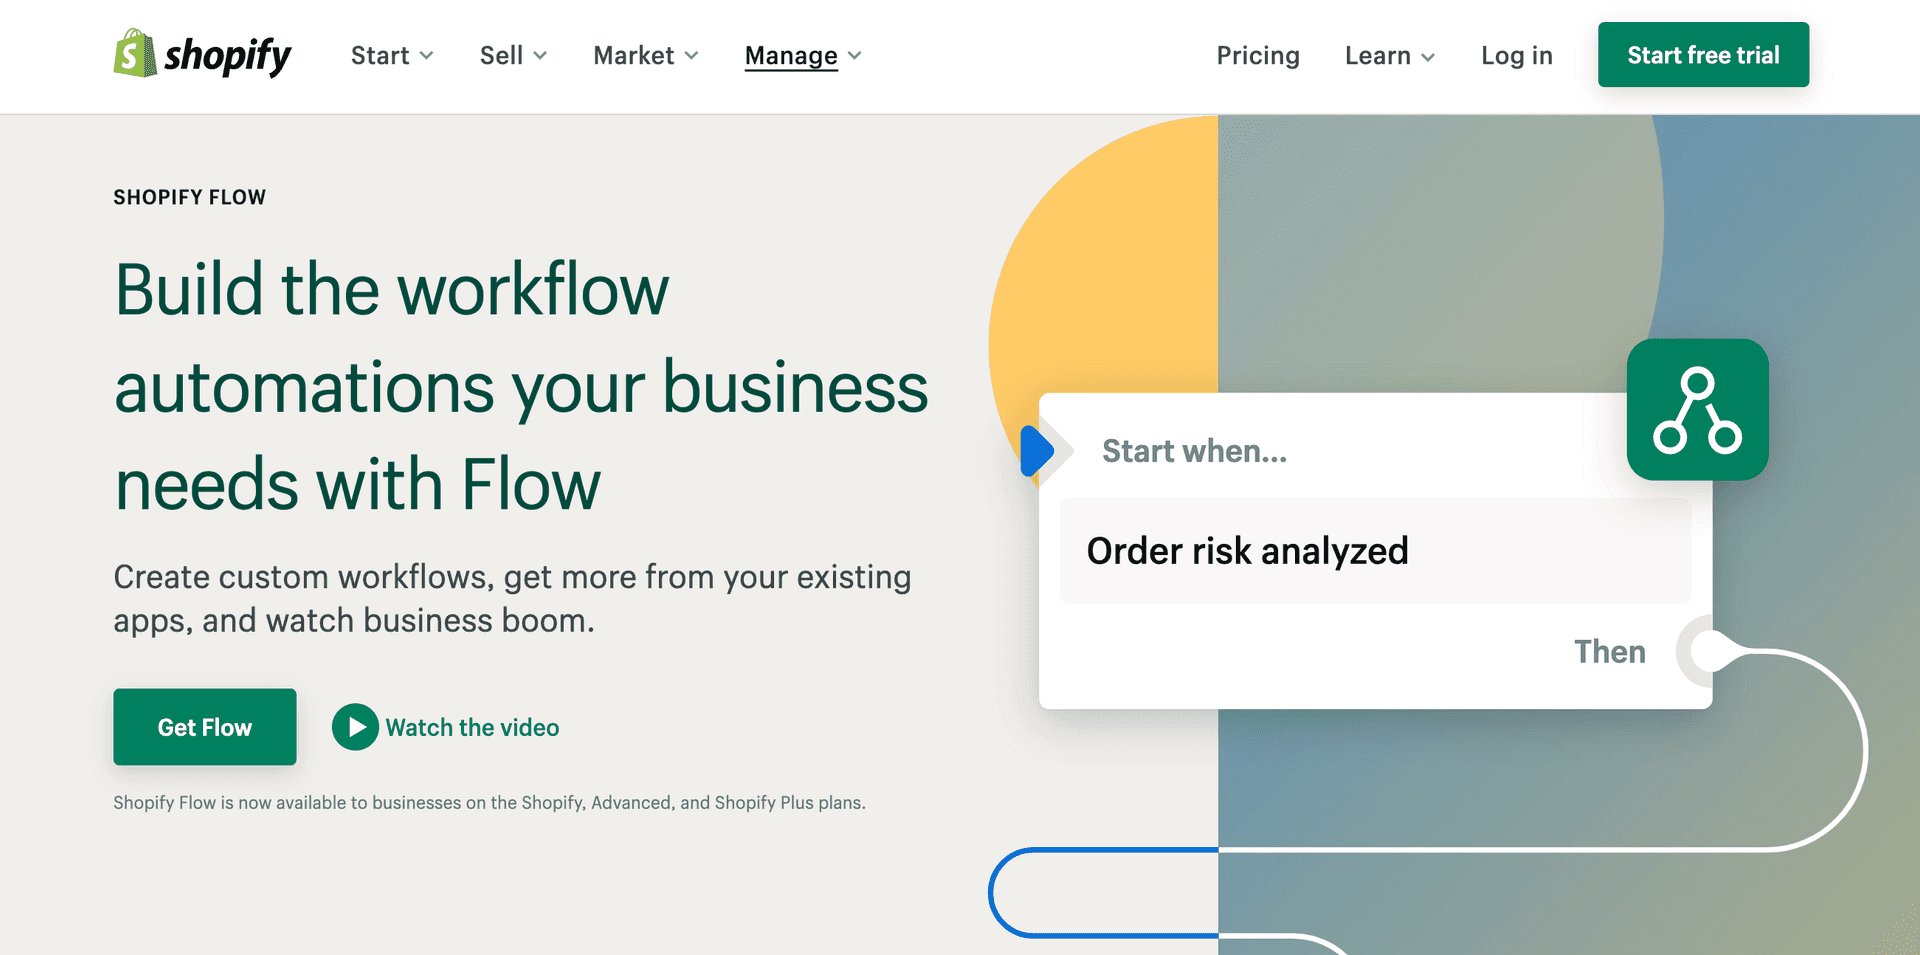 automate your workflows with Shopify Flow